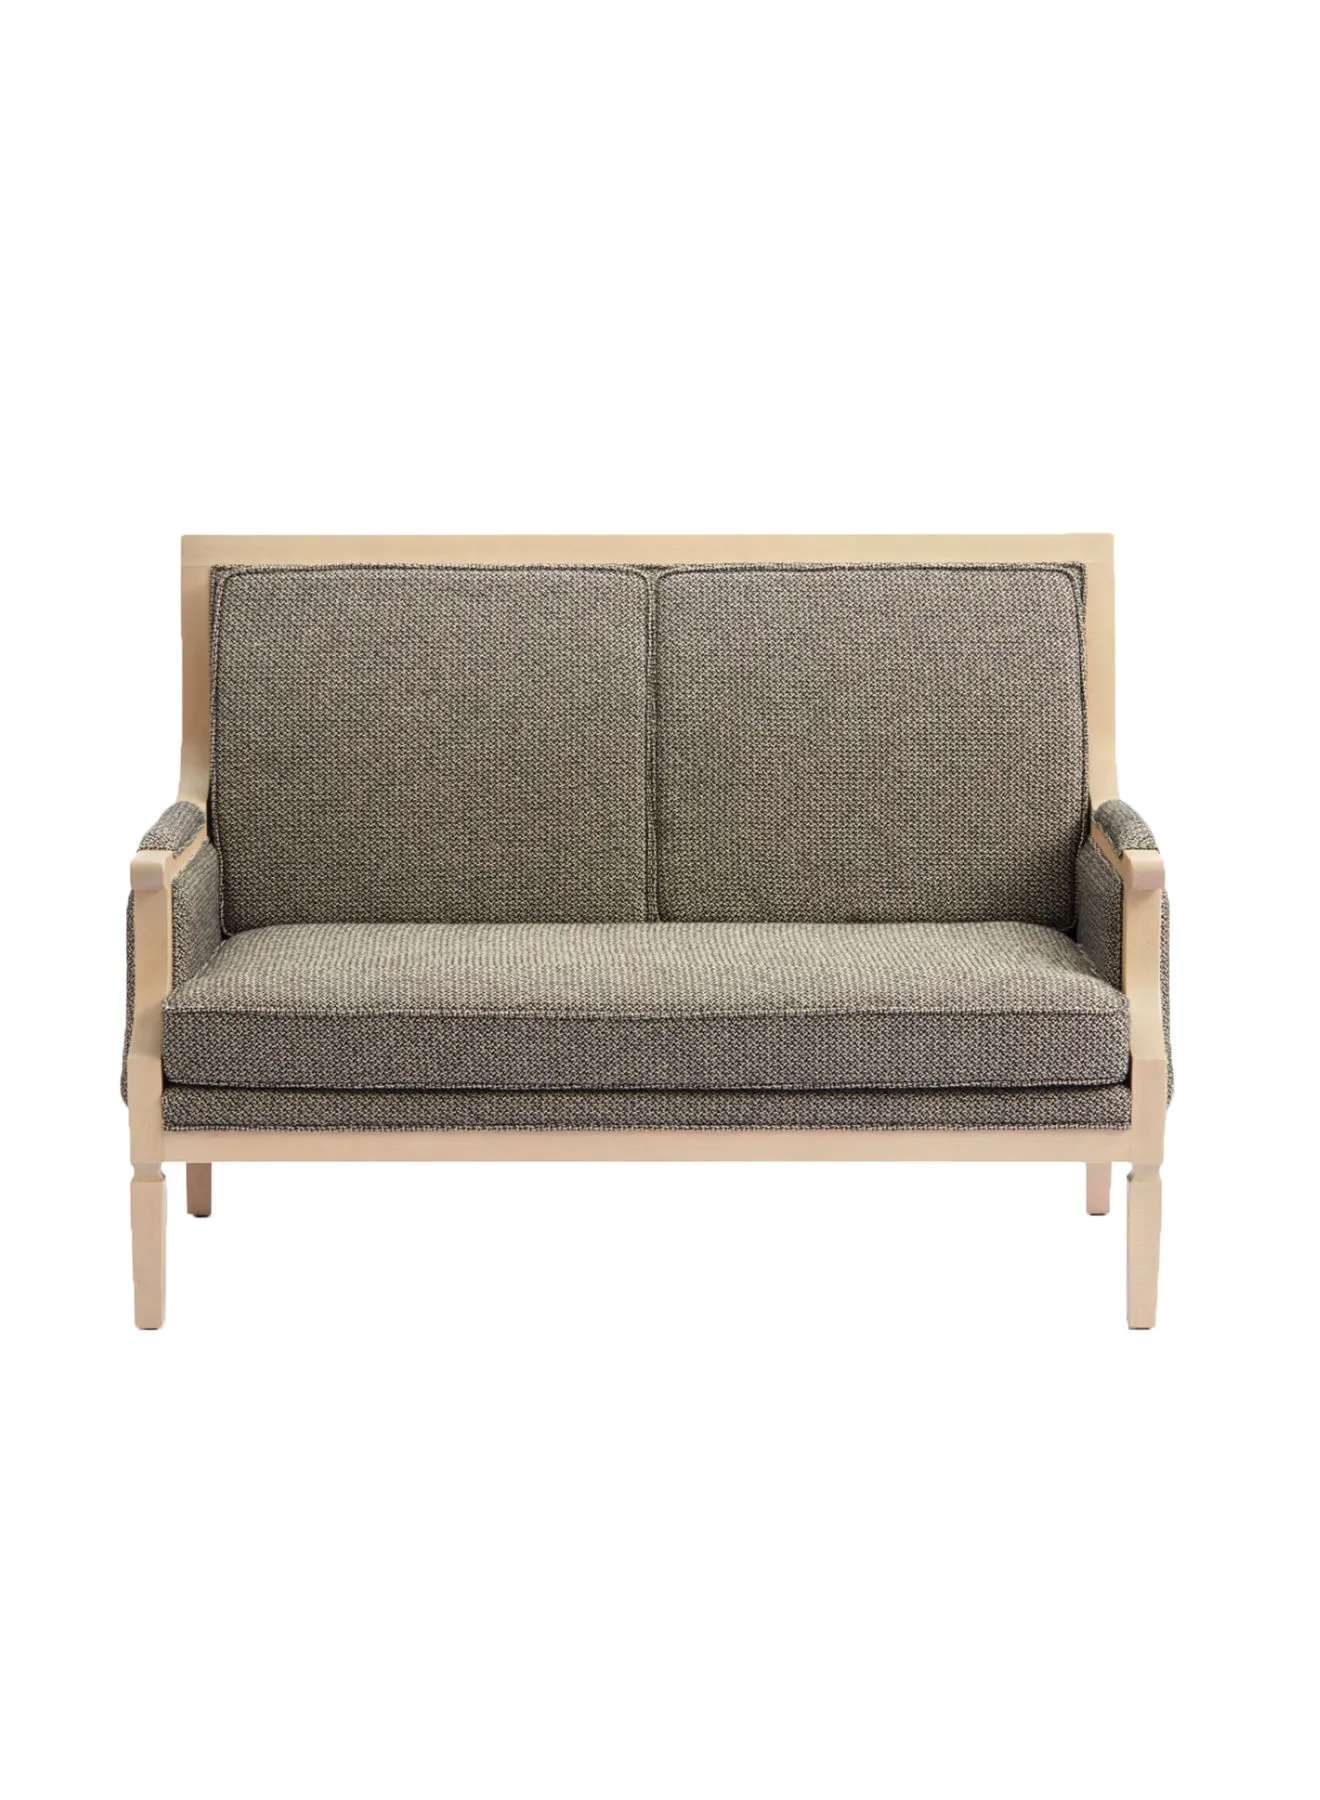 ebb & flow Sofa Luxurious - Brown/Grey Wood Couch - 1380 X 790 X 980 - 2 Seater Sofa Relaxing Sofa